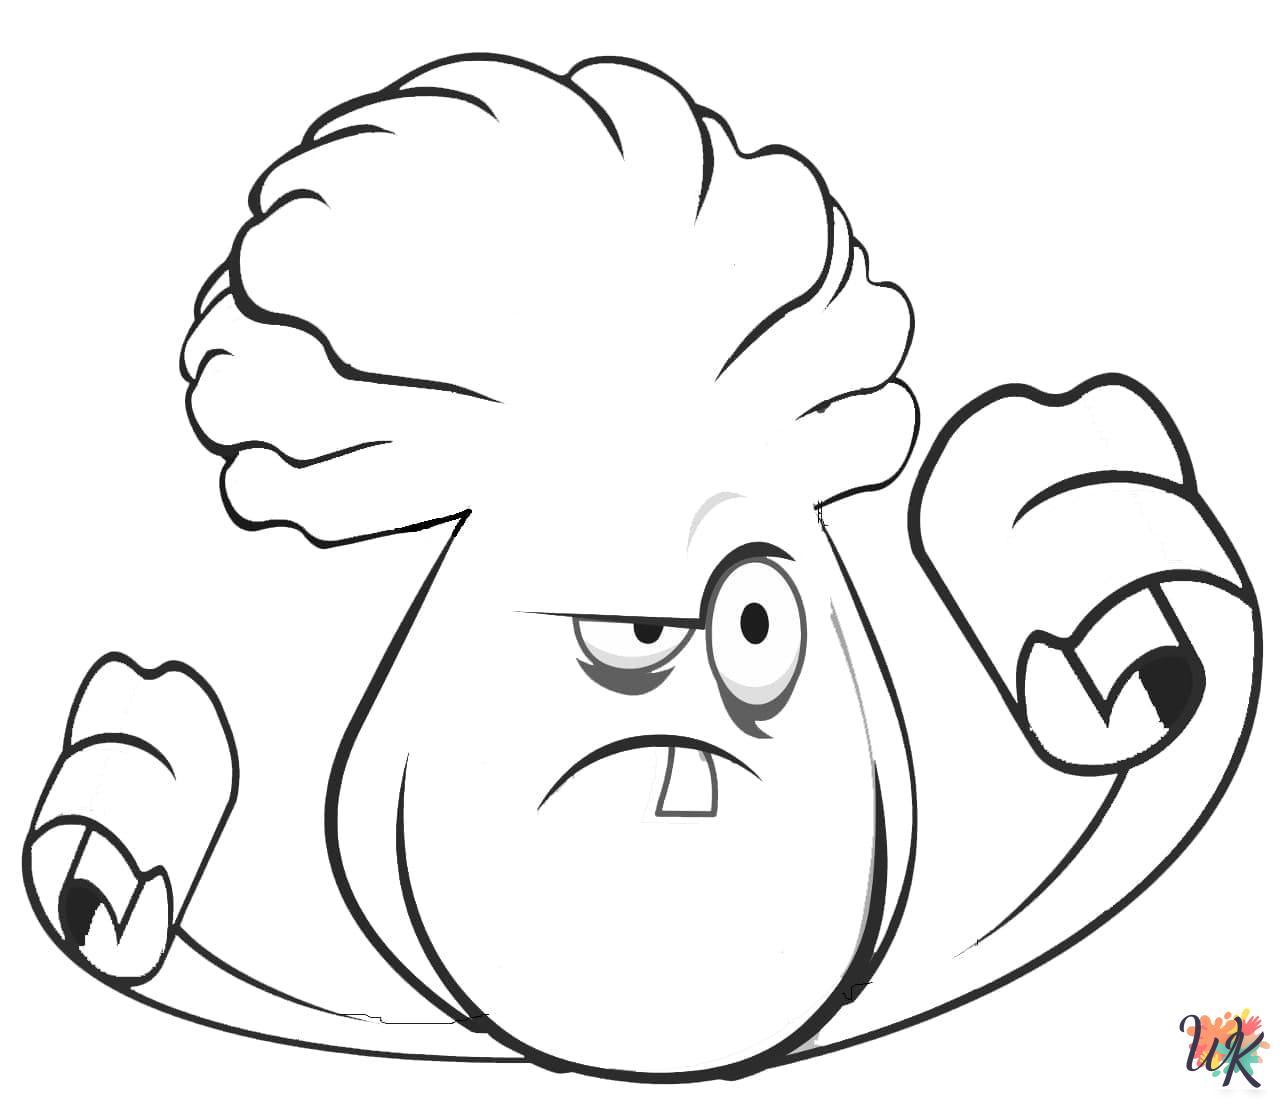 merry Plants vs. Zombies coloring pages